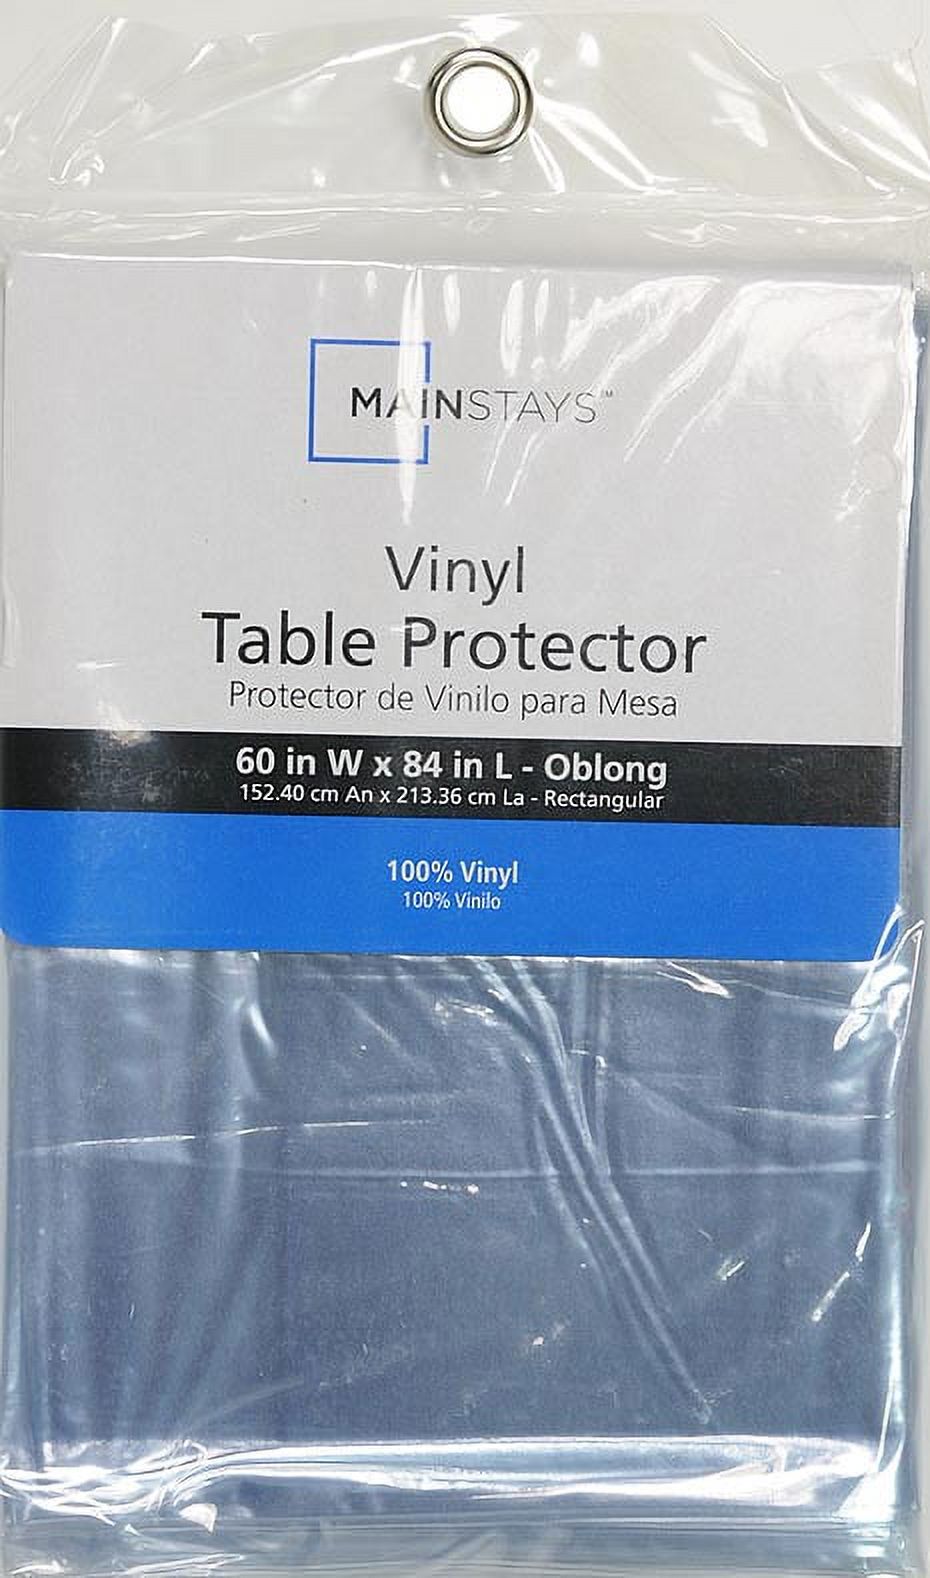 Mainstays Vinyl Protector Tablecloth Protector, Clear, 60"W x 84"L - image 2 of 5